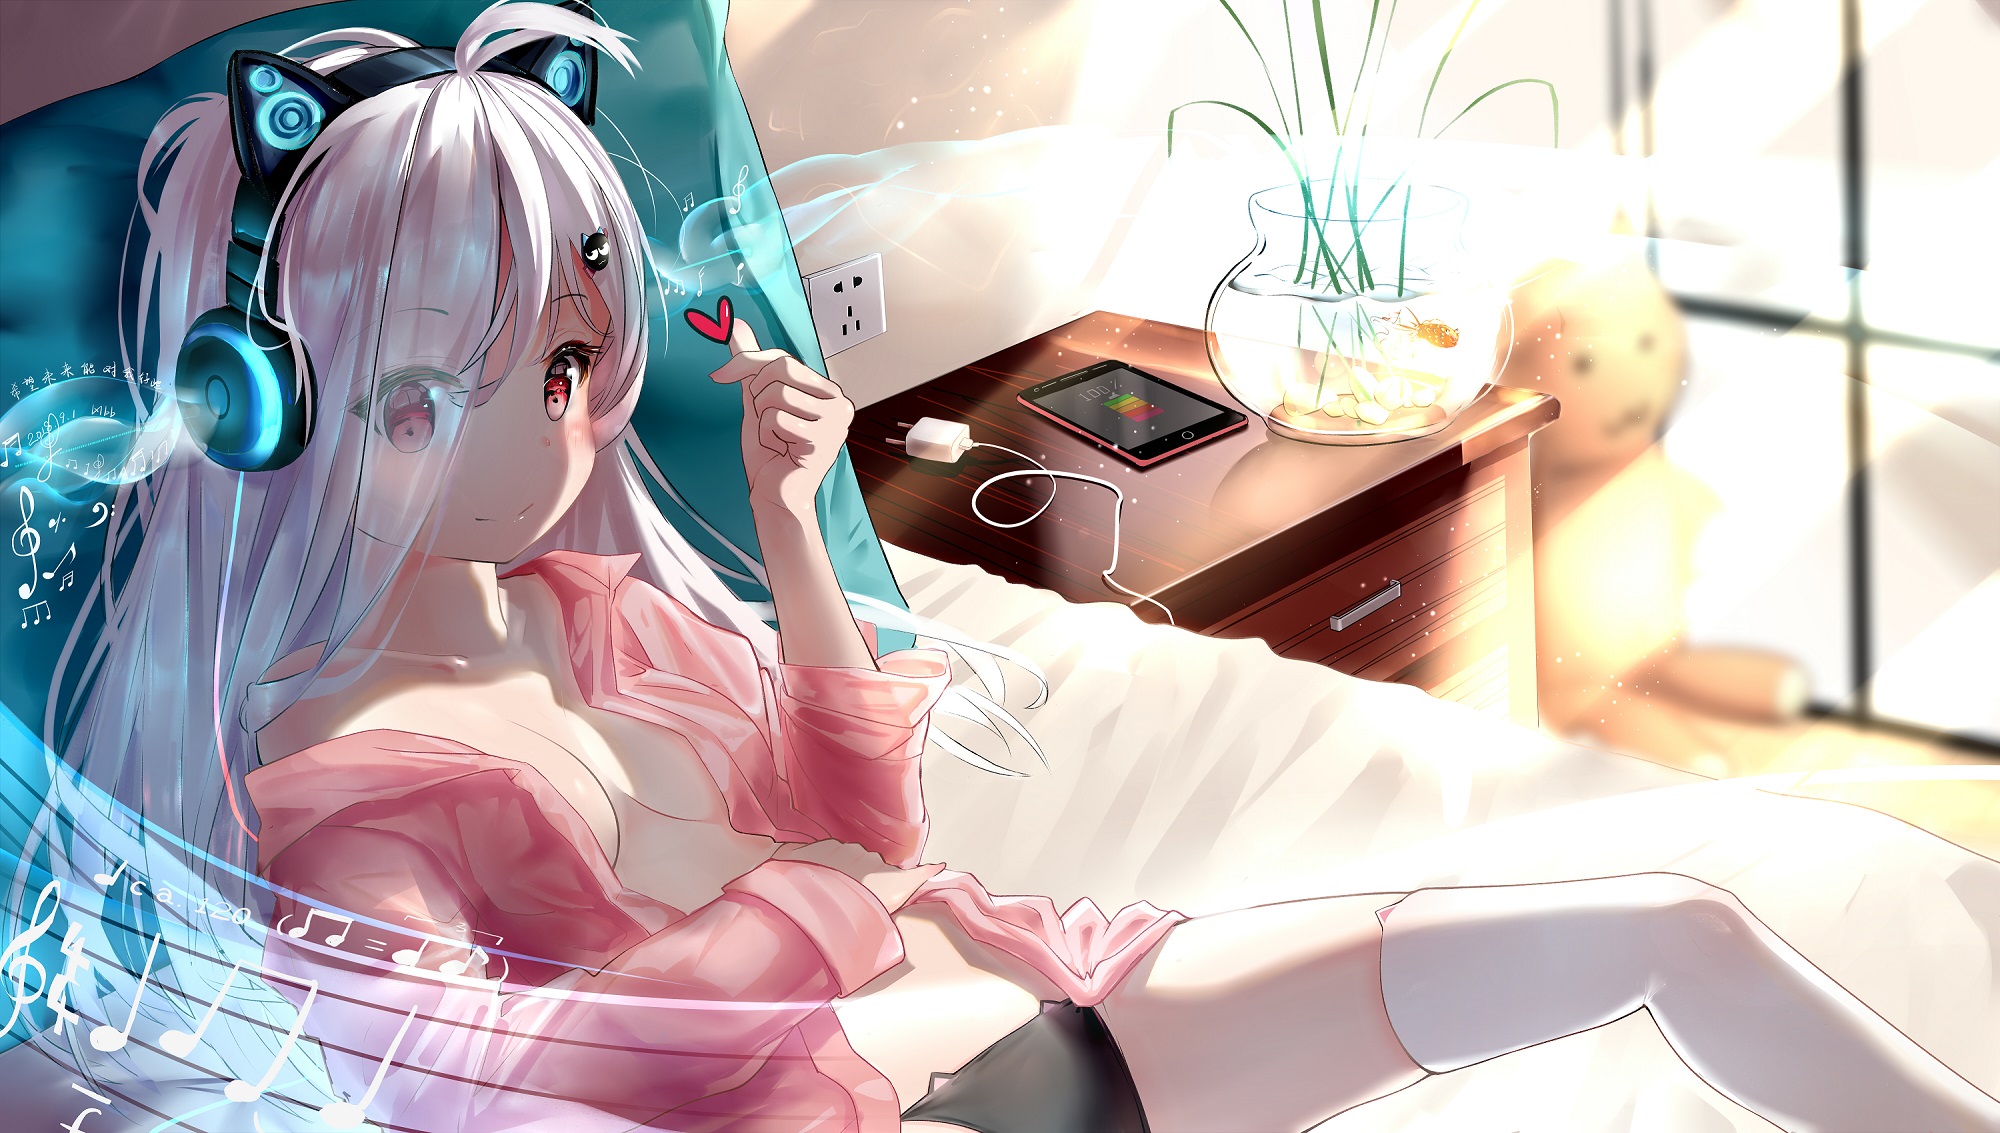 Anime 2000x1133 anime girls anime HBB artwork silver hair red eyes in bed headphones thigh-highs open shirt no bra cleavage panties